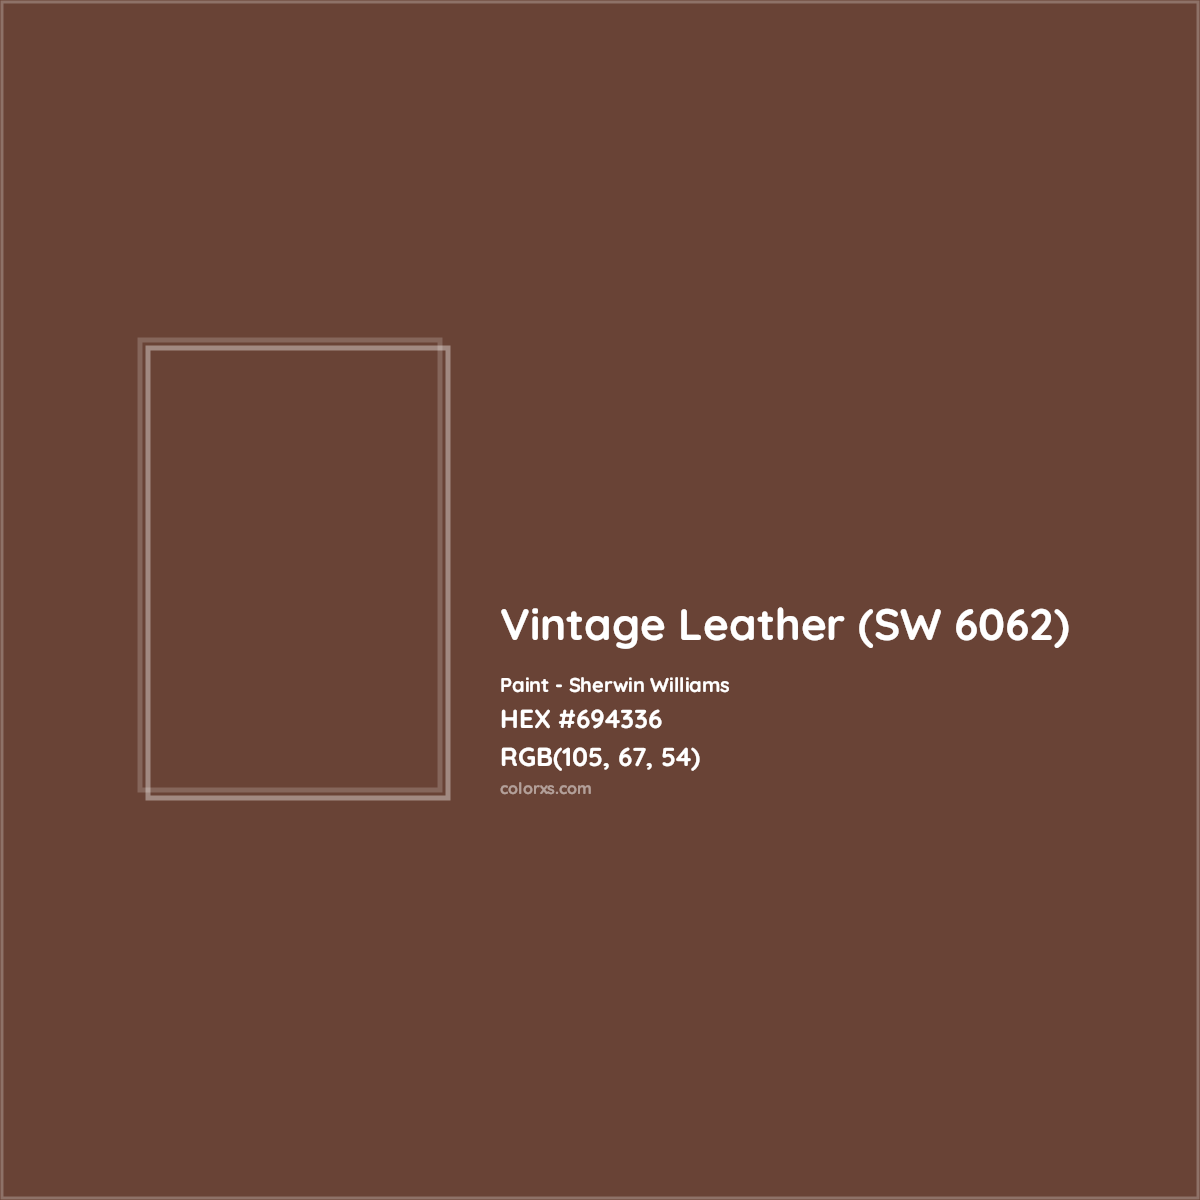 HEX #694336 Vintage Leather (SW 6062) Paint Sherwin Williams - Color Code